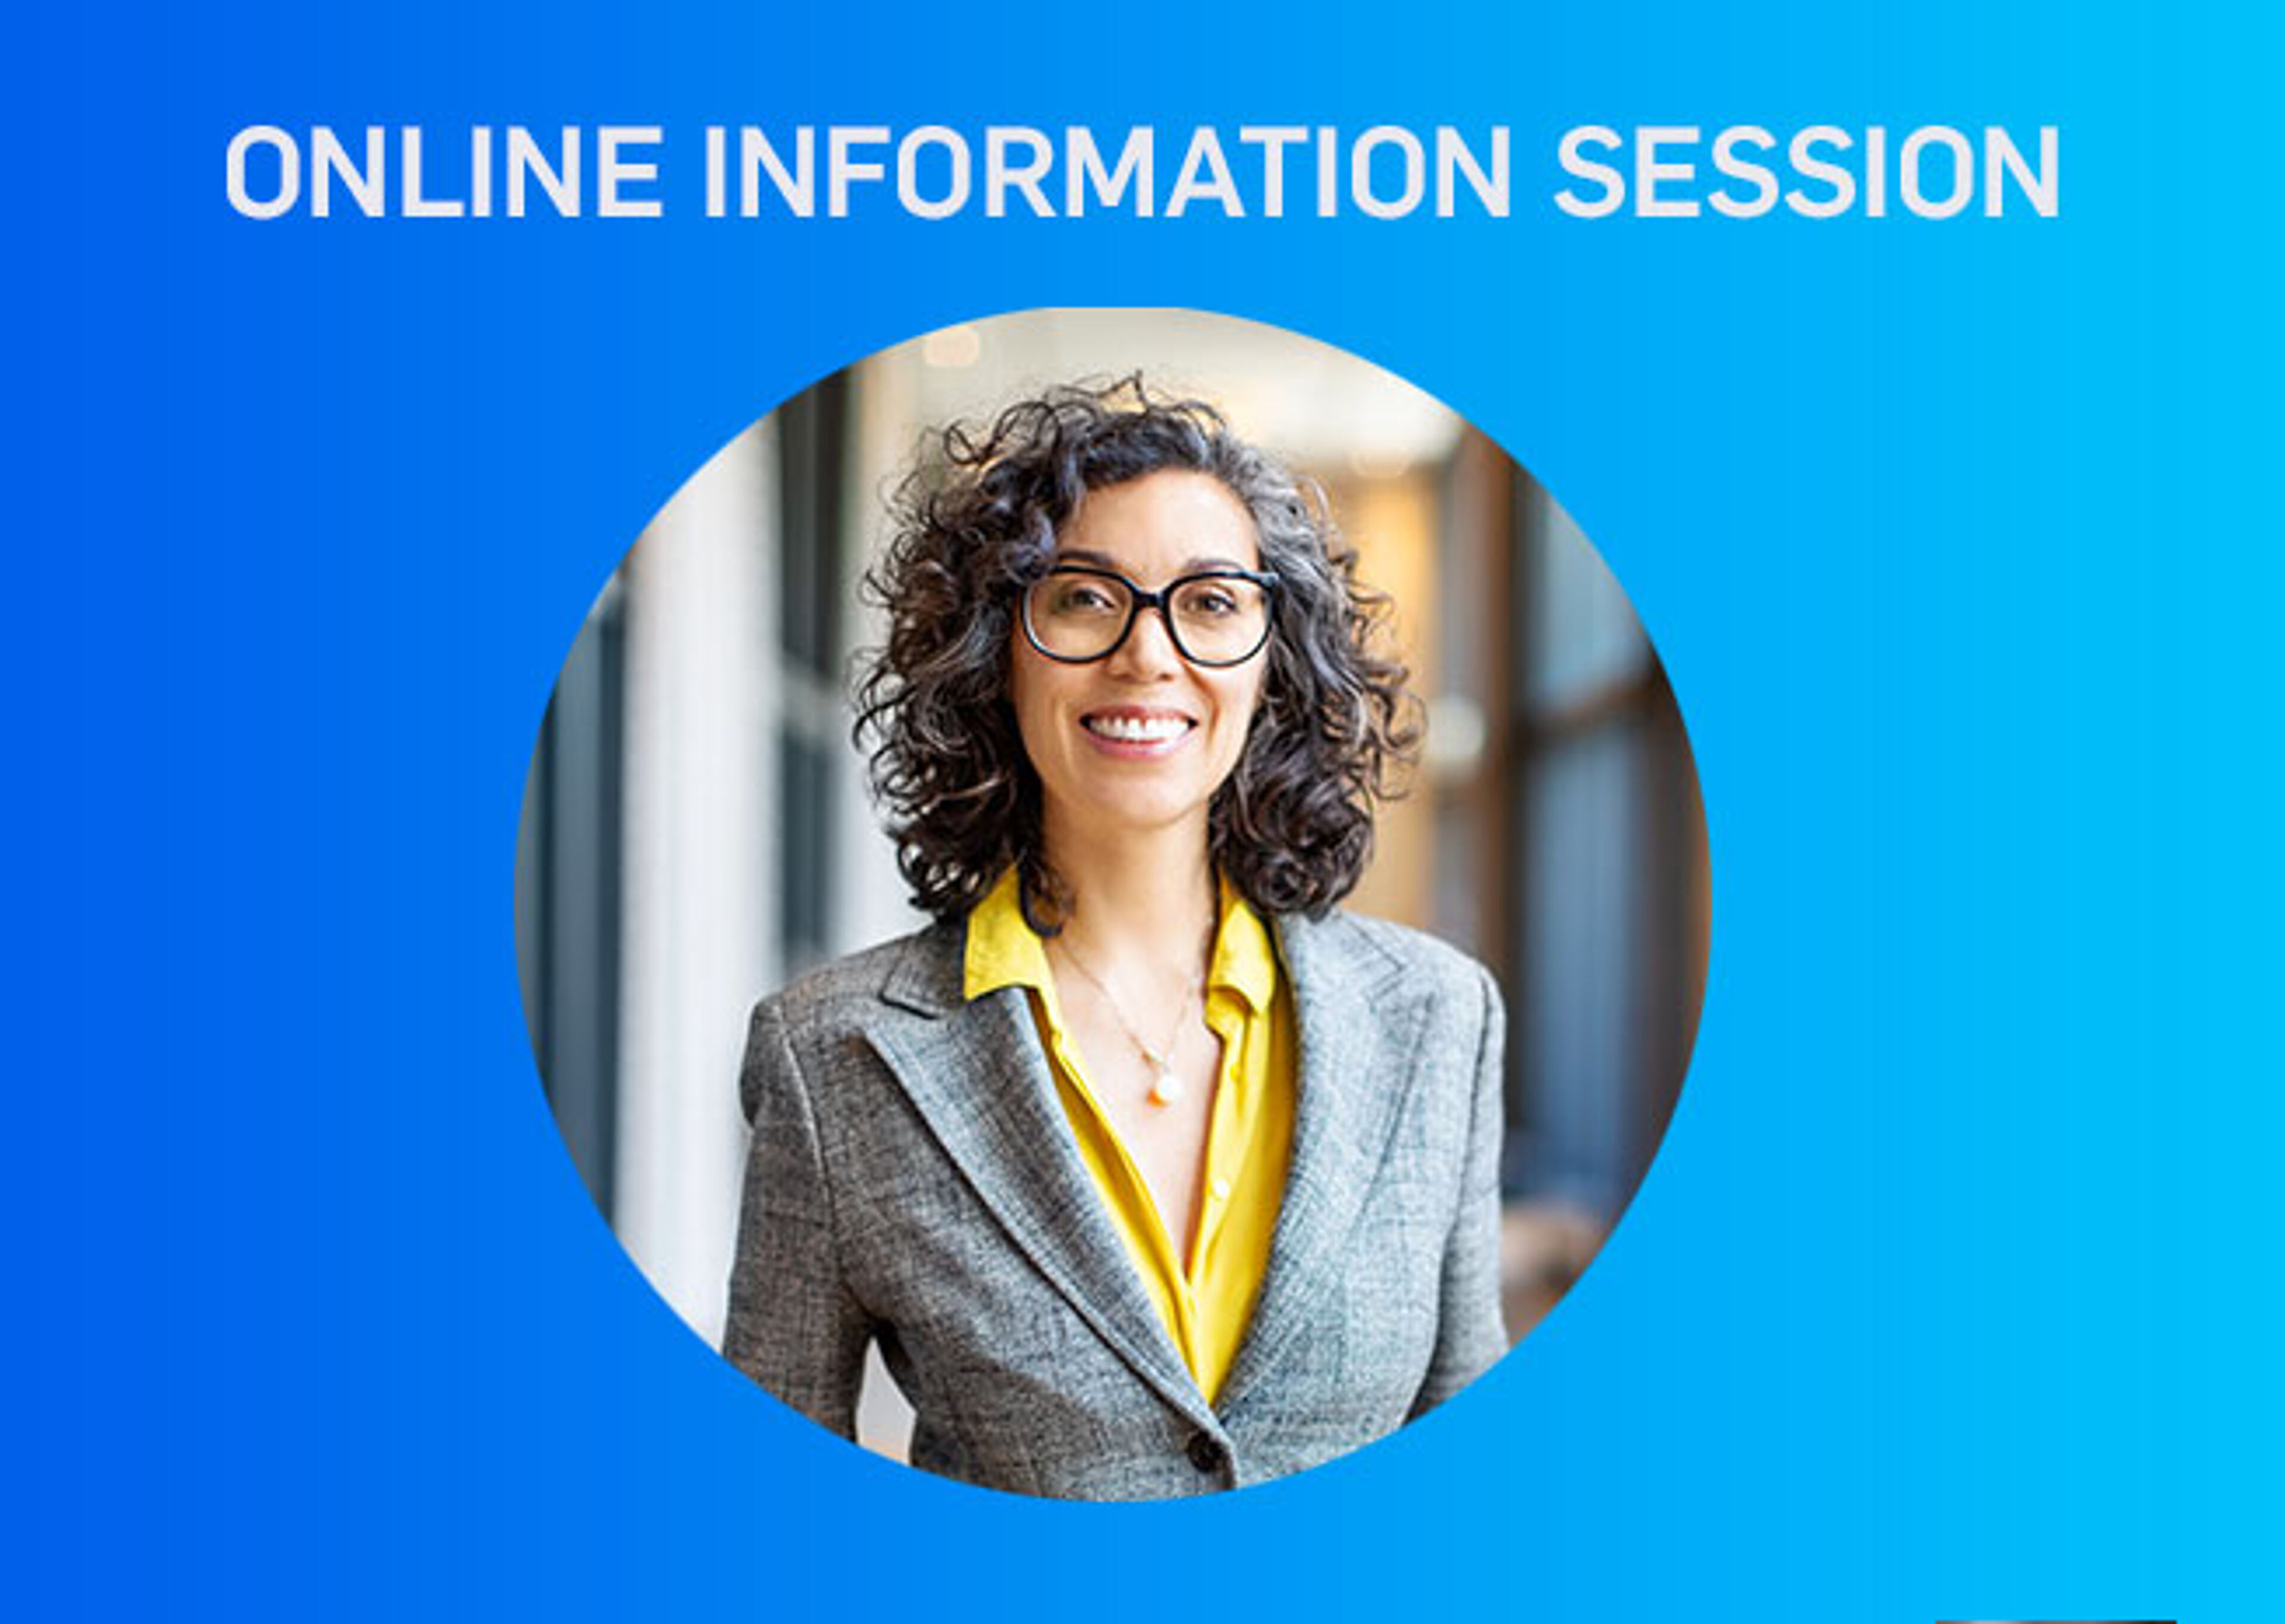 Promotional image for an online information session featuring a confident woman with glasses.